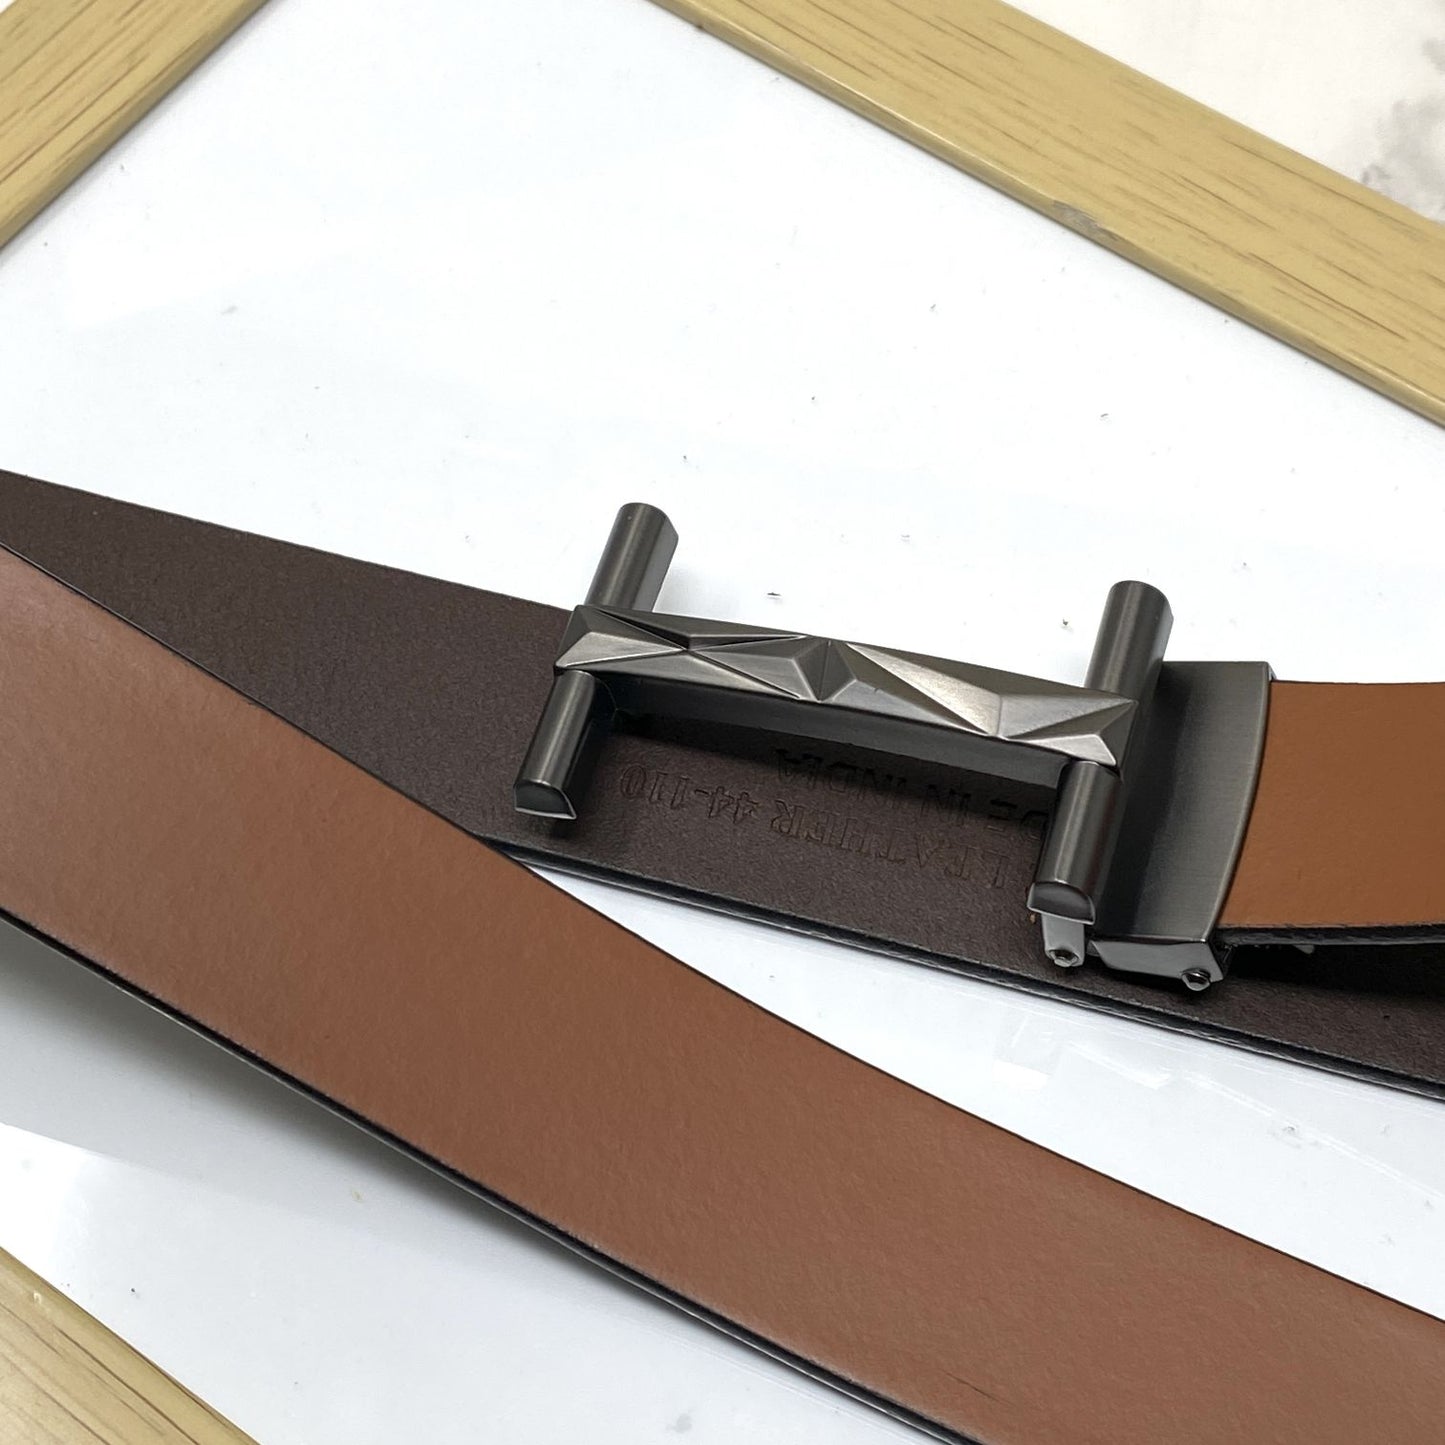 New Arrival H- Pattern Formal and Casual Leather Strap Belt-JonasParamount